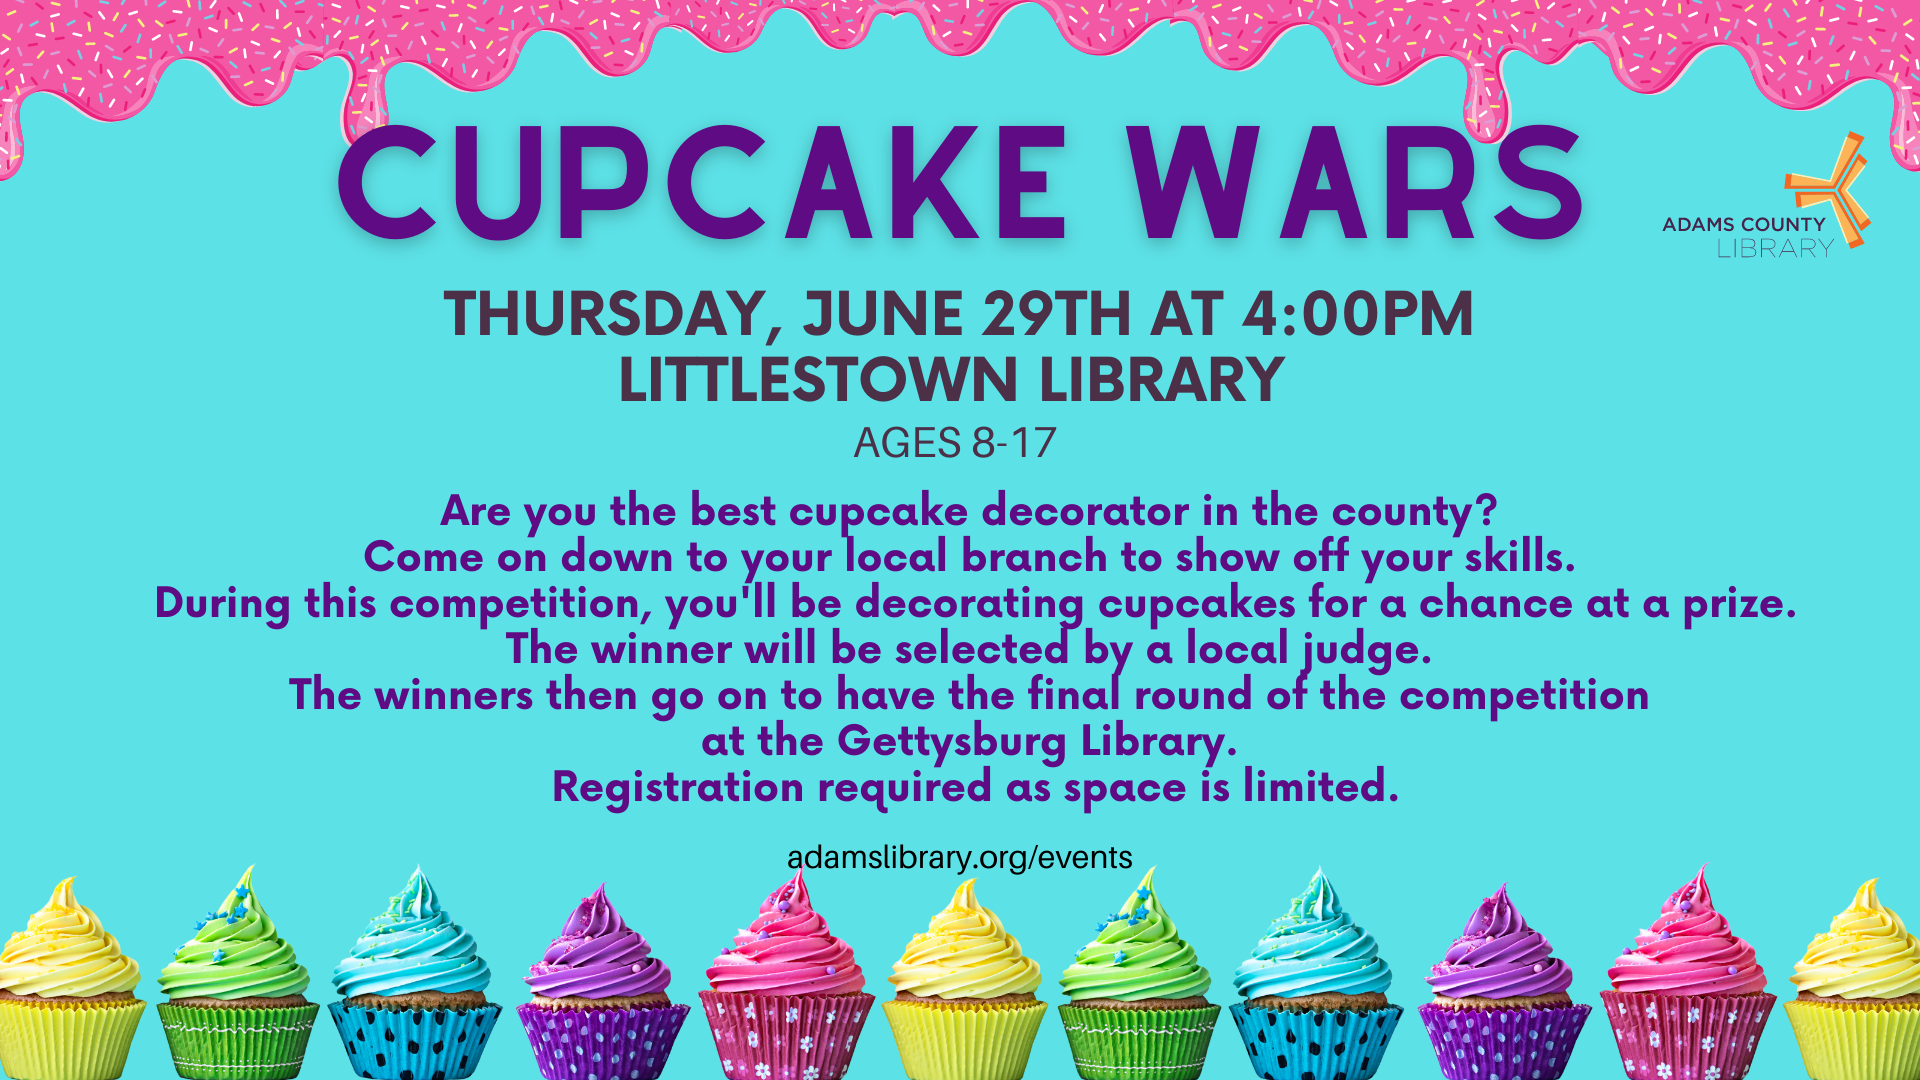 Cupcake Wars at the Littlestown Library